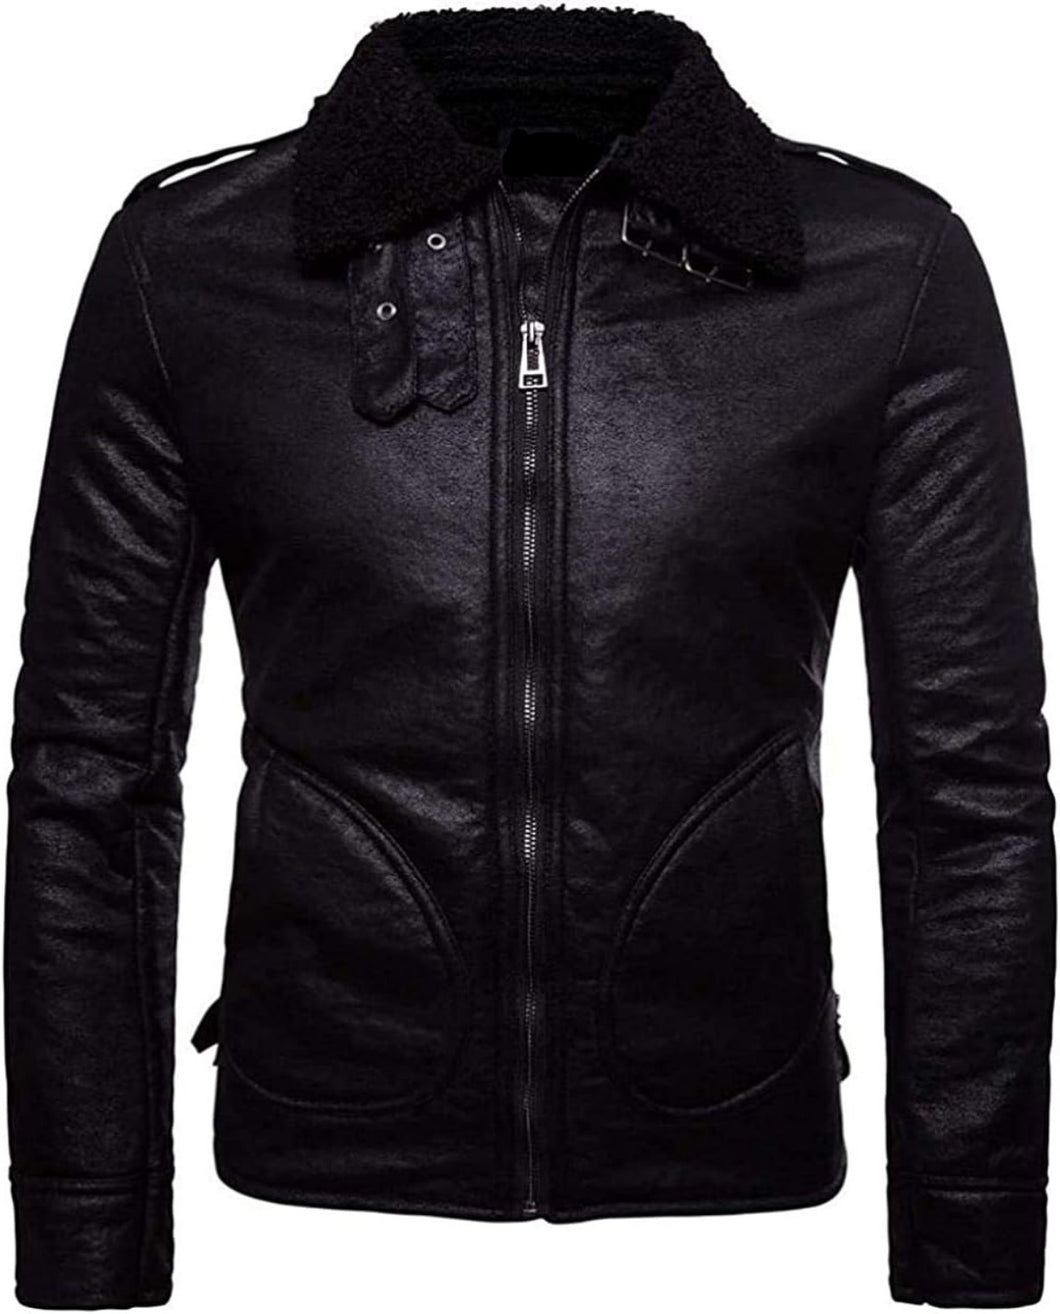 Men's Stand Collar Warm Motercycle Leather Jacket